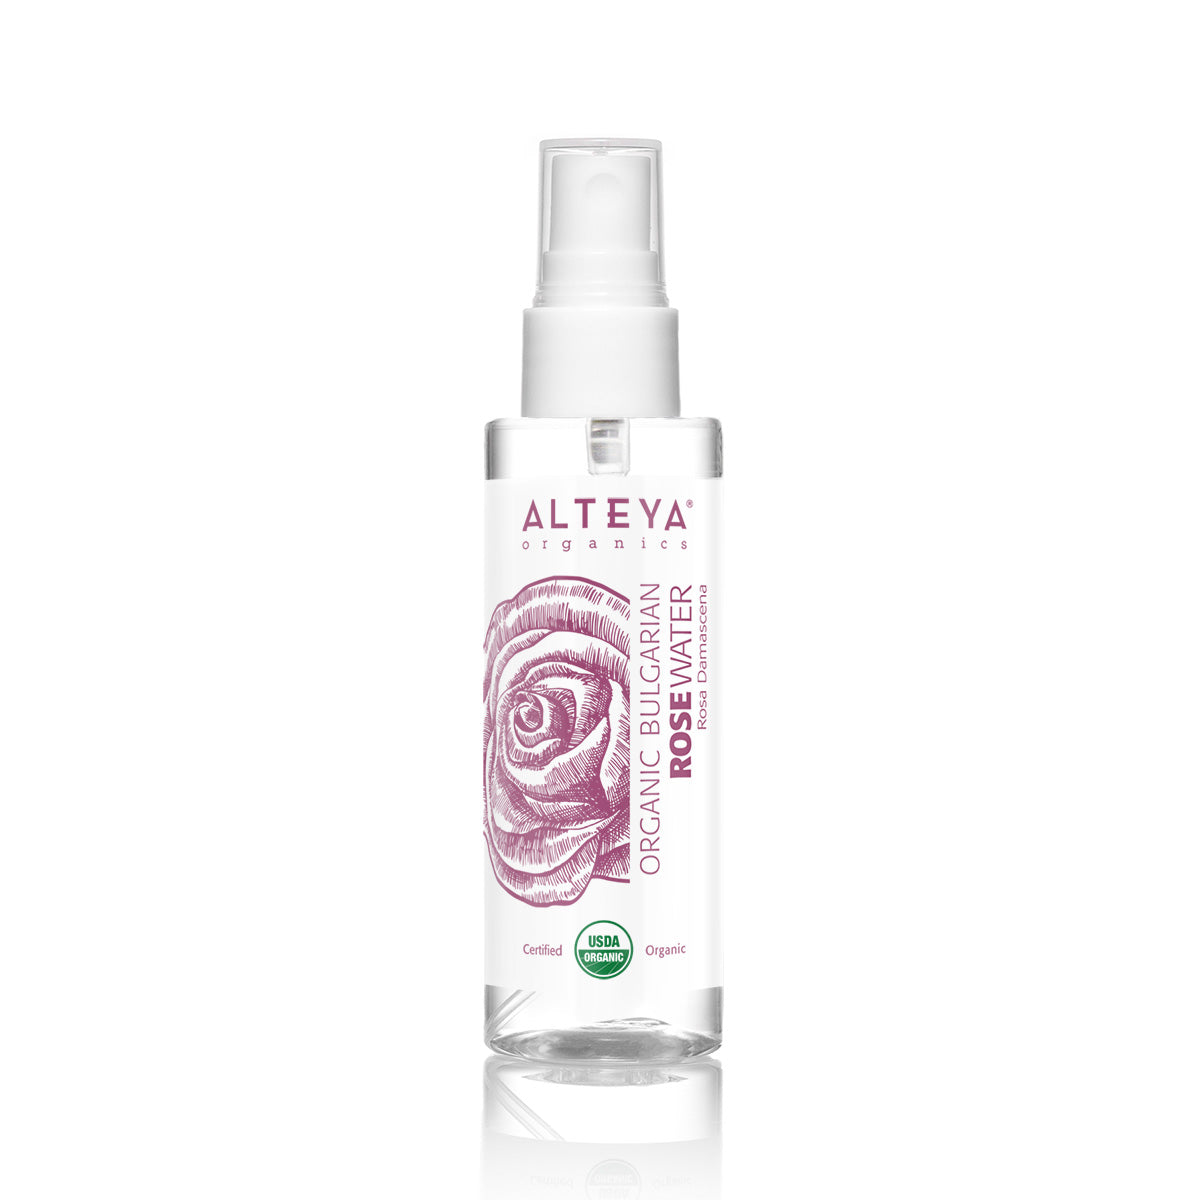 A bottle of Bulgarian Organic Rose Water - 3.4 Fl Oz Spray, known for its skin hydration properties, displayed on a pristine white background.